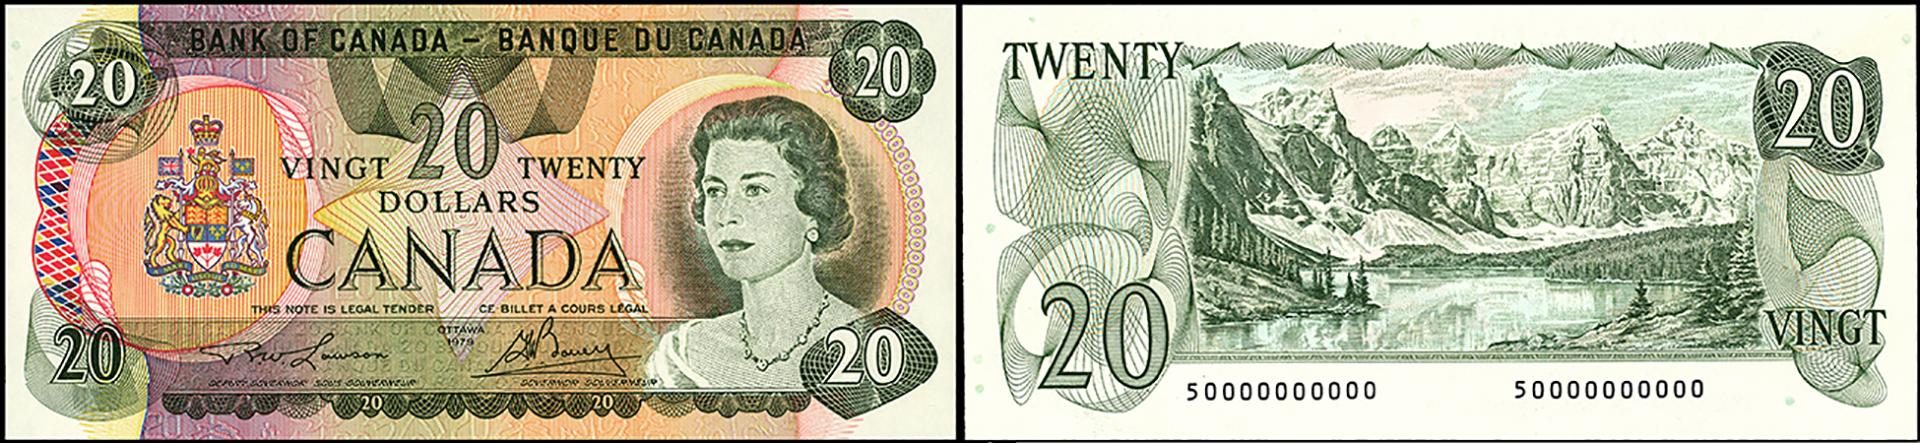 Bank note, green, both sides, one showing a middle-aged female monarch and the other with a lake surrounded by tall mountains.